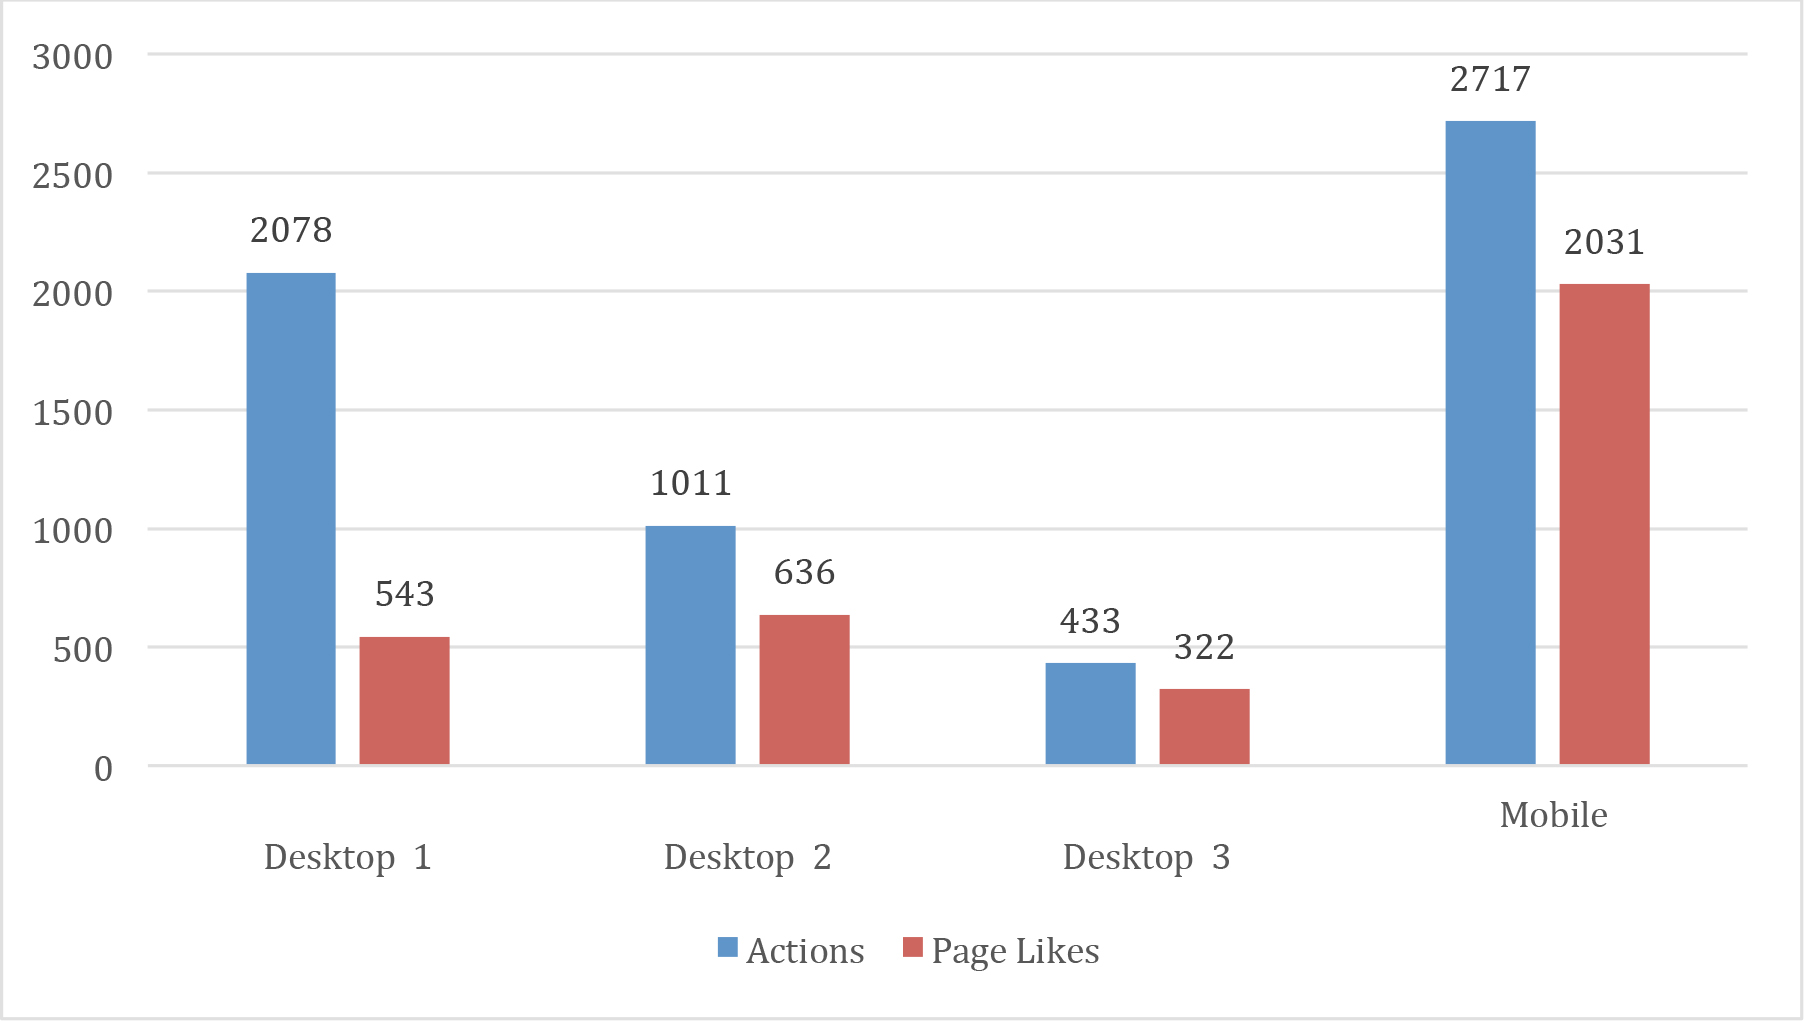 Woodville Deer and Wildlife Festival Facebook campaign overall performance: For desktop 1, actions are 2,078, and page likes are 543; for desktop 2, actions are 1,011, and page likes are 636; for desktop 3, actions are 433, and page likes are 322; and for mobile, actions are 2,717, and page likes are 2,031.